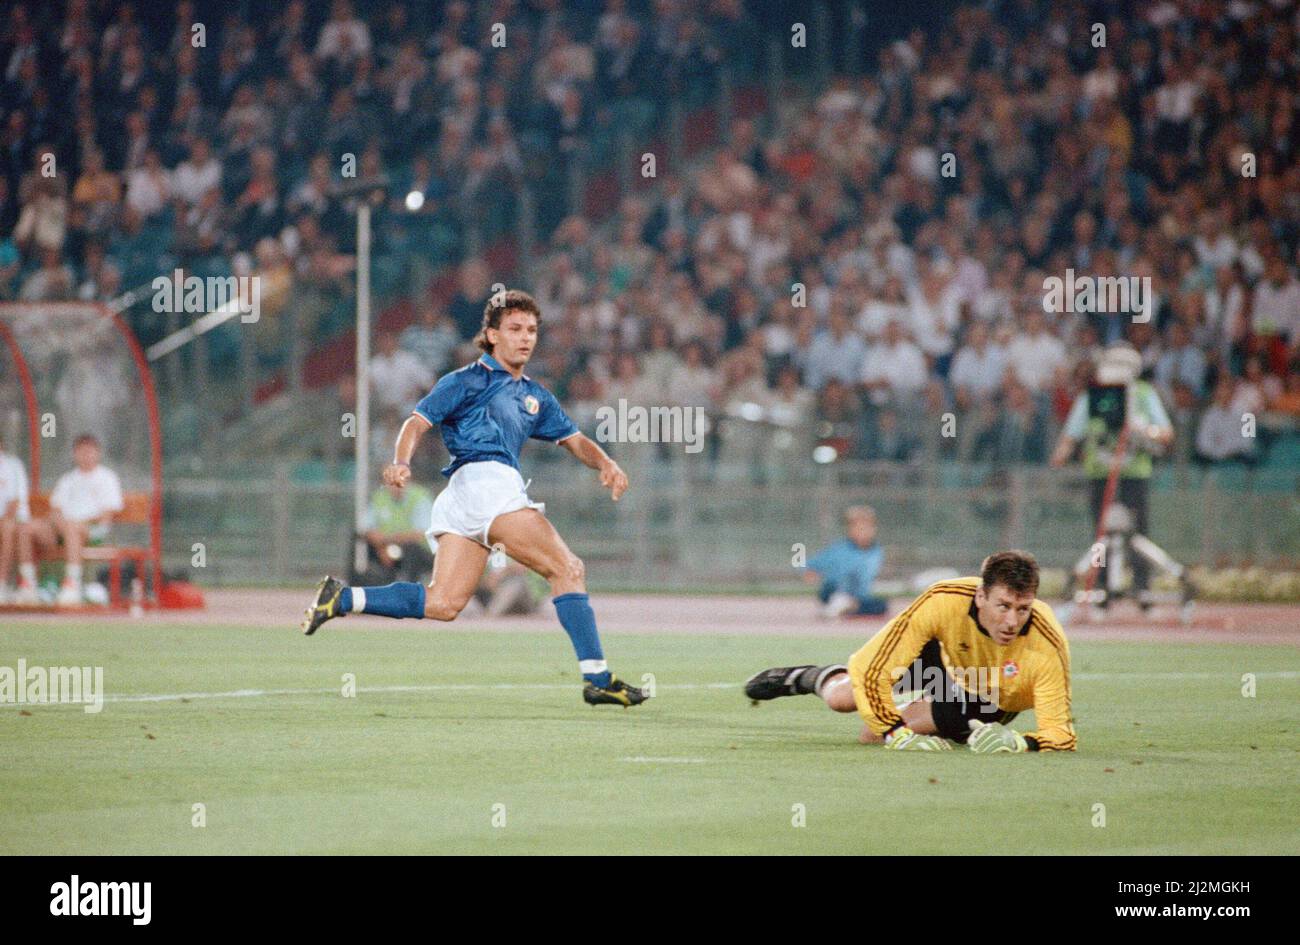 1990 World Cup Quarter Final at the Stadio Olimpico in  Rome, Italy. Republic of Ireland 0 v Italy 1. Roberto Baggio effort on goal watched by Pat Bonner. 30th June 1990. Stock Photo